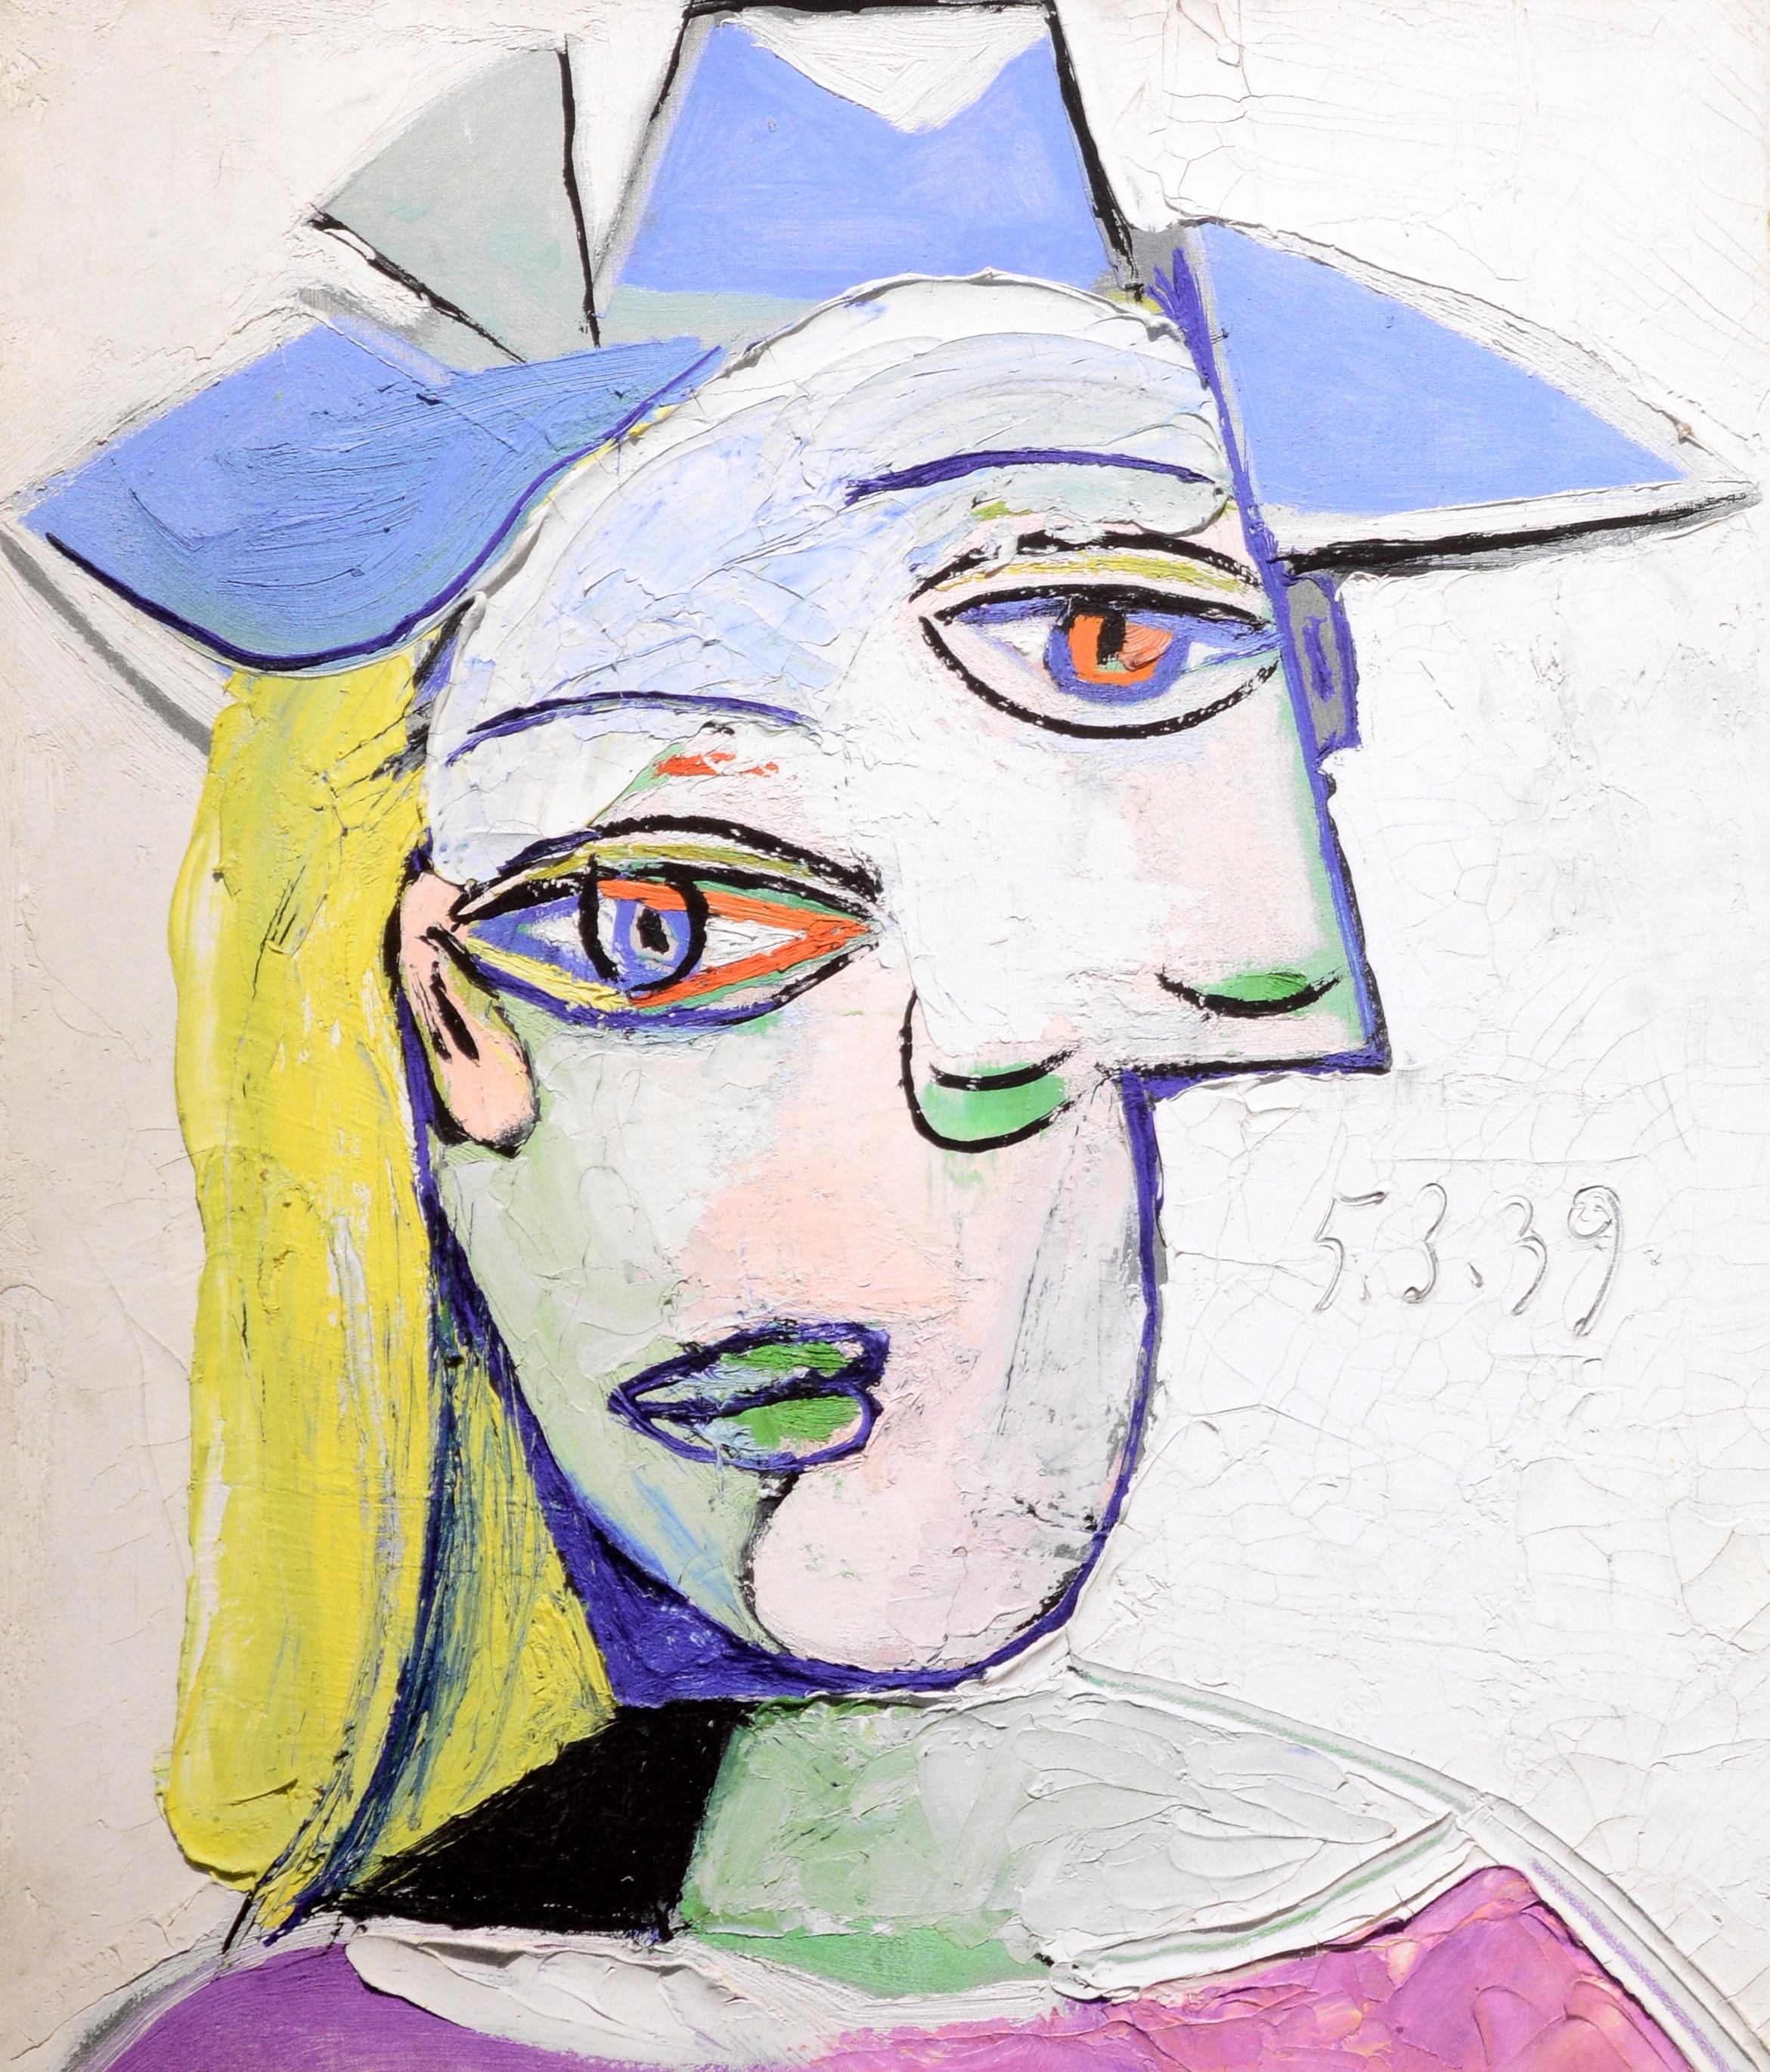 Picasso & Marie-Therese, L'Amour Fou von Richardso & Diana Widmaier, 1. Auflage im Angebot 6